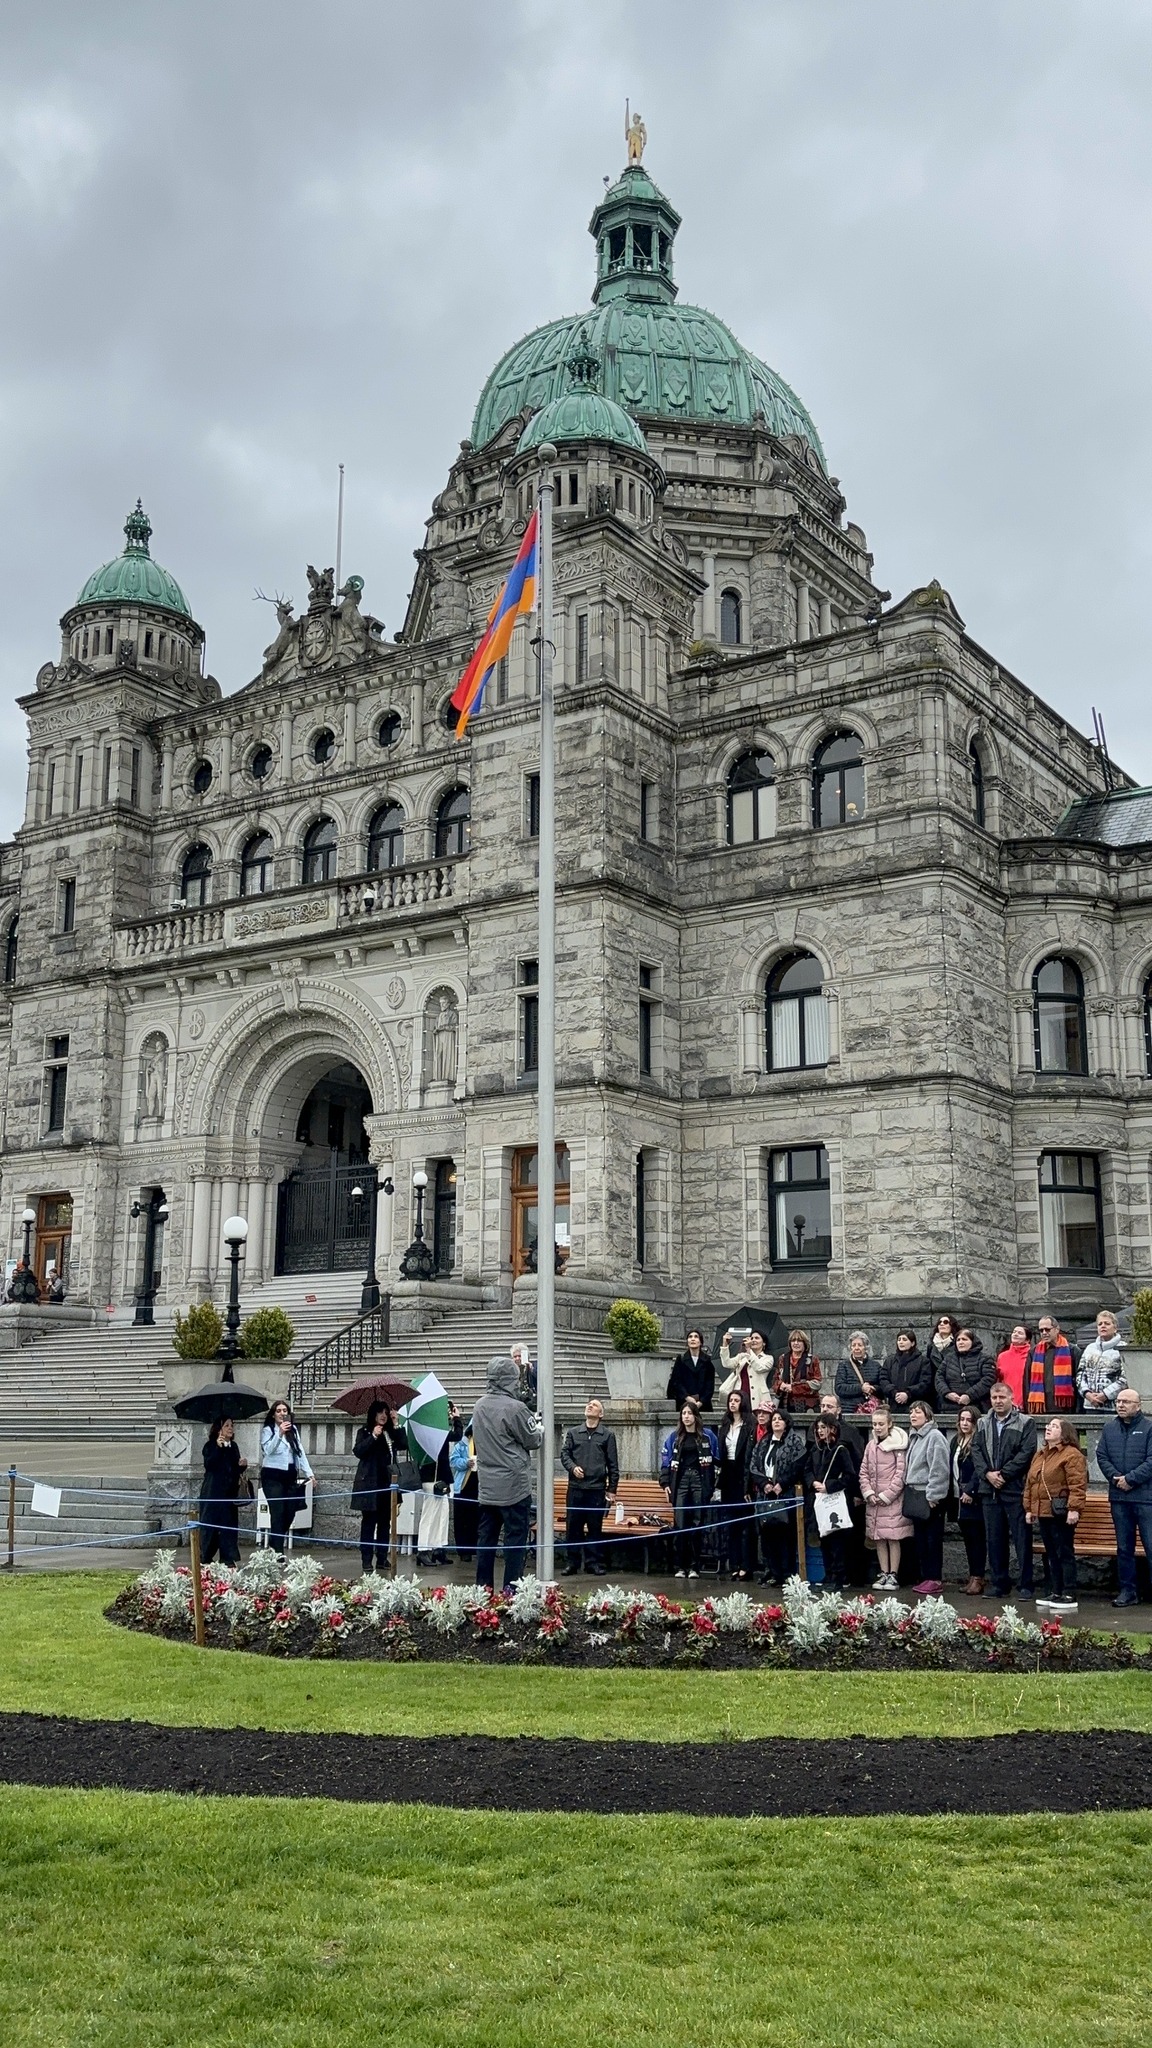 In a poignant gathering of remembrance and solidarity, the Armenian National Committee of Canada, in collaboration with the Government of British Columbia, orchestrated a solemn commemorative event marking the 109th anniversary of the Armenian Genocide. Held within the esteemed confines of the BC Legislature building in Victoria on Wednesday, April 24th, the event drew dignitaries,